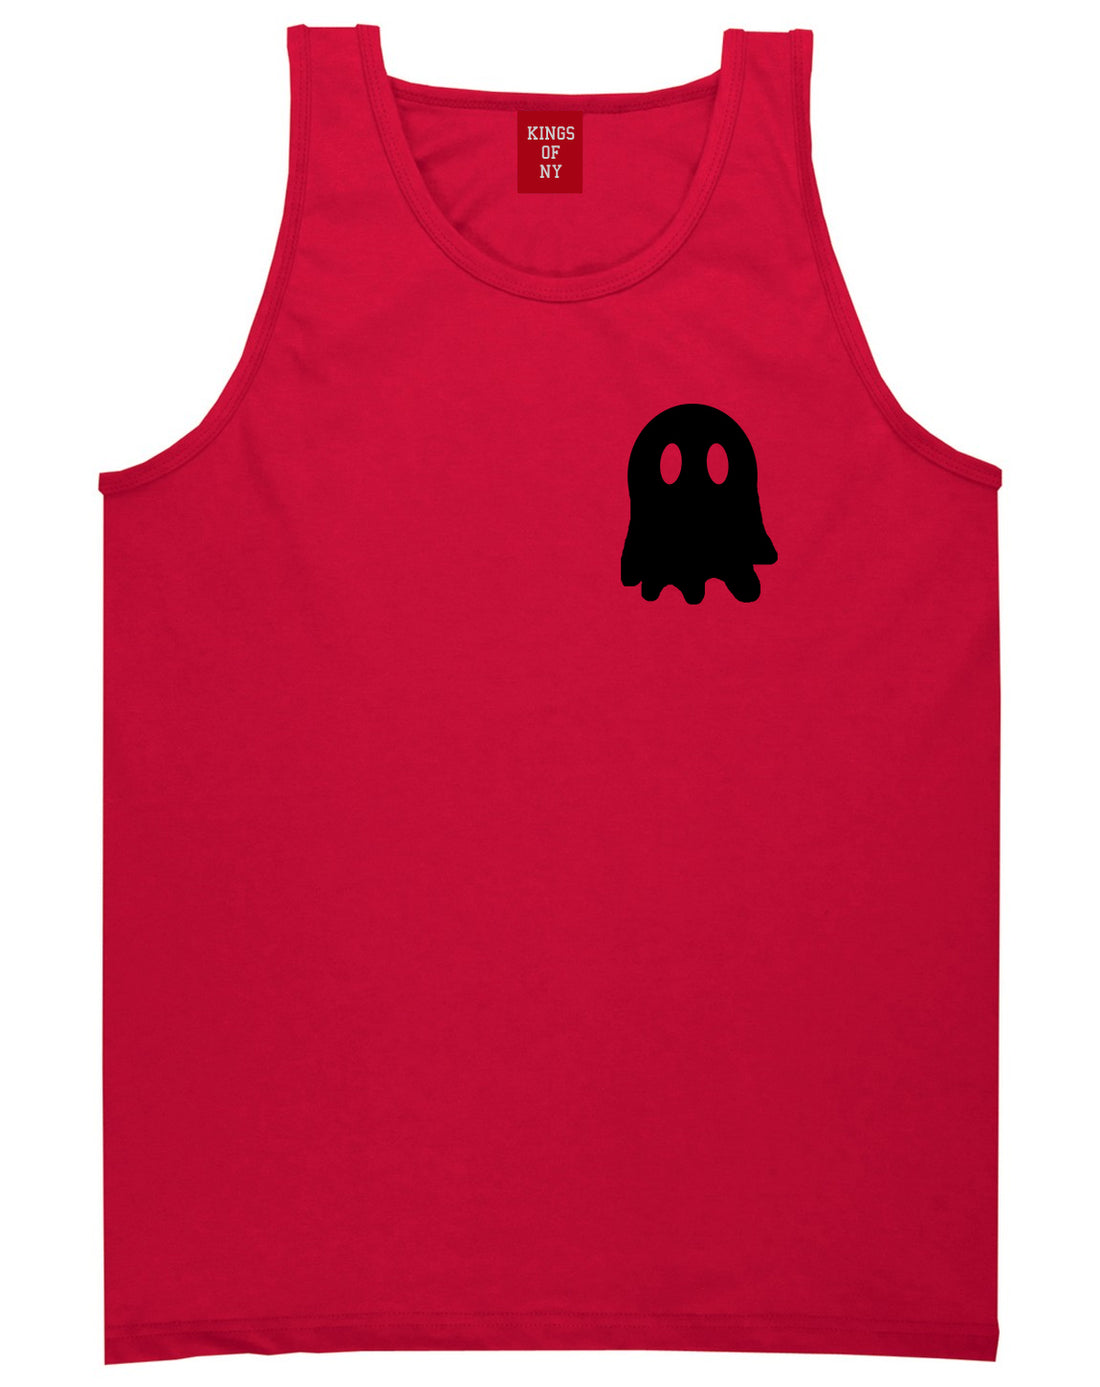 Ghost Chest Mens Red Tank Top Shirt by KINGS OF NY